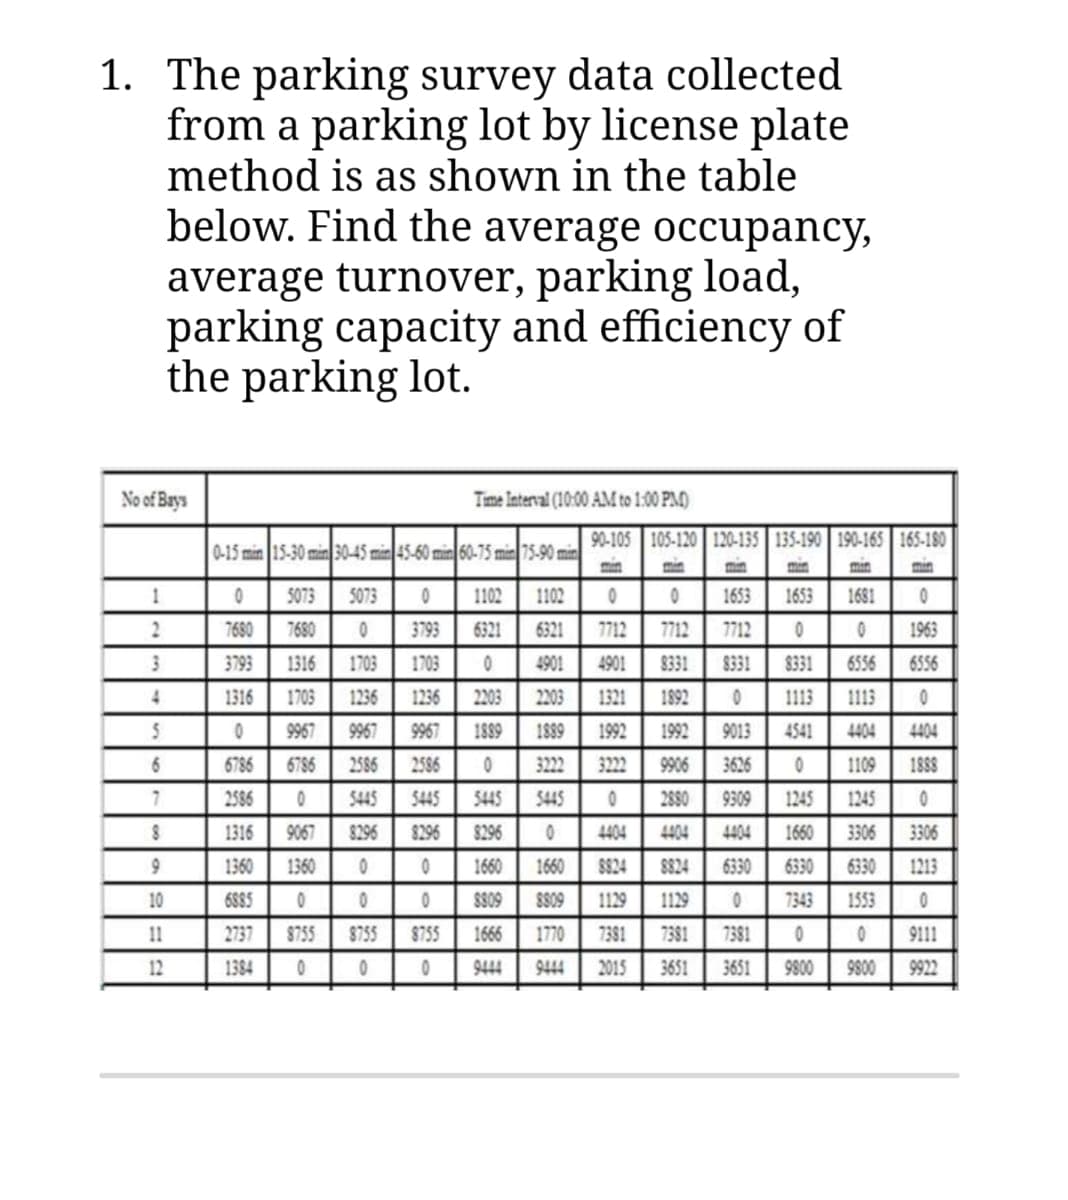 1. The parking survey data collected
from a parking lot by license plate
method is as shown in the table
below. Find the average occupancy,
average turnover, parking load,
parking capacity and efficiency of
the parking lot.
No of Bays
1
2
3
4
5
6
7
8
9
10
11
12
Time Interval (10:00 AM to 1:00 PM)
90-105 105-120 120-135 135-190 190-165 165-180
min
min
min
min
0
1653
1681
0
7712
7712 0
0
1963
6321
4901 4901
2203
8331 8331 8331 6556 6556
1321
1892 0
1113
1113 0
1992
1992
9013
4541
4404
4404
3222 9906
3626 0 1109 1888
0 2880
9309 1245 1245
0
1660 3306 3306
6330 6330 1213
1553
0
0
9111
9800
9922
0-15 min 15-30 min 30-45 min 45-60 min 60-75 min 75-90 min
7680
7680
0 5073 5073 0 1102 1102
3793 6321
1703 0
1236 2203
0
1703
3793 1316
1316 1703
1236
0
9967
9967
9967
1889 1889
6786
6786 2586 2586 0
3222
2586
0
5445
5445
5445
5445
1316
9067 8296 8296
8296
0
1360
1360
0
0
1660 1660
6885
0
0
0
8809 8809
2737
8755
8755
8755
1666 1770
1384
0
0
0
9444 9444
4404
8824
1129
7381
2015
0
7712
4404
8824
1129
7381 7381
3651
3651
6330
1653
0 7343
0
9800
P